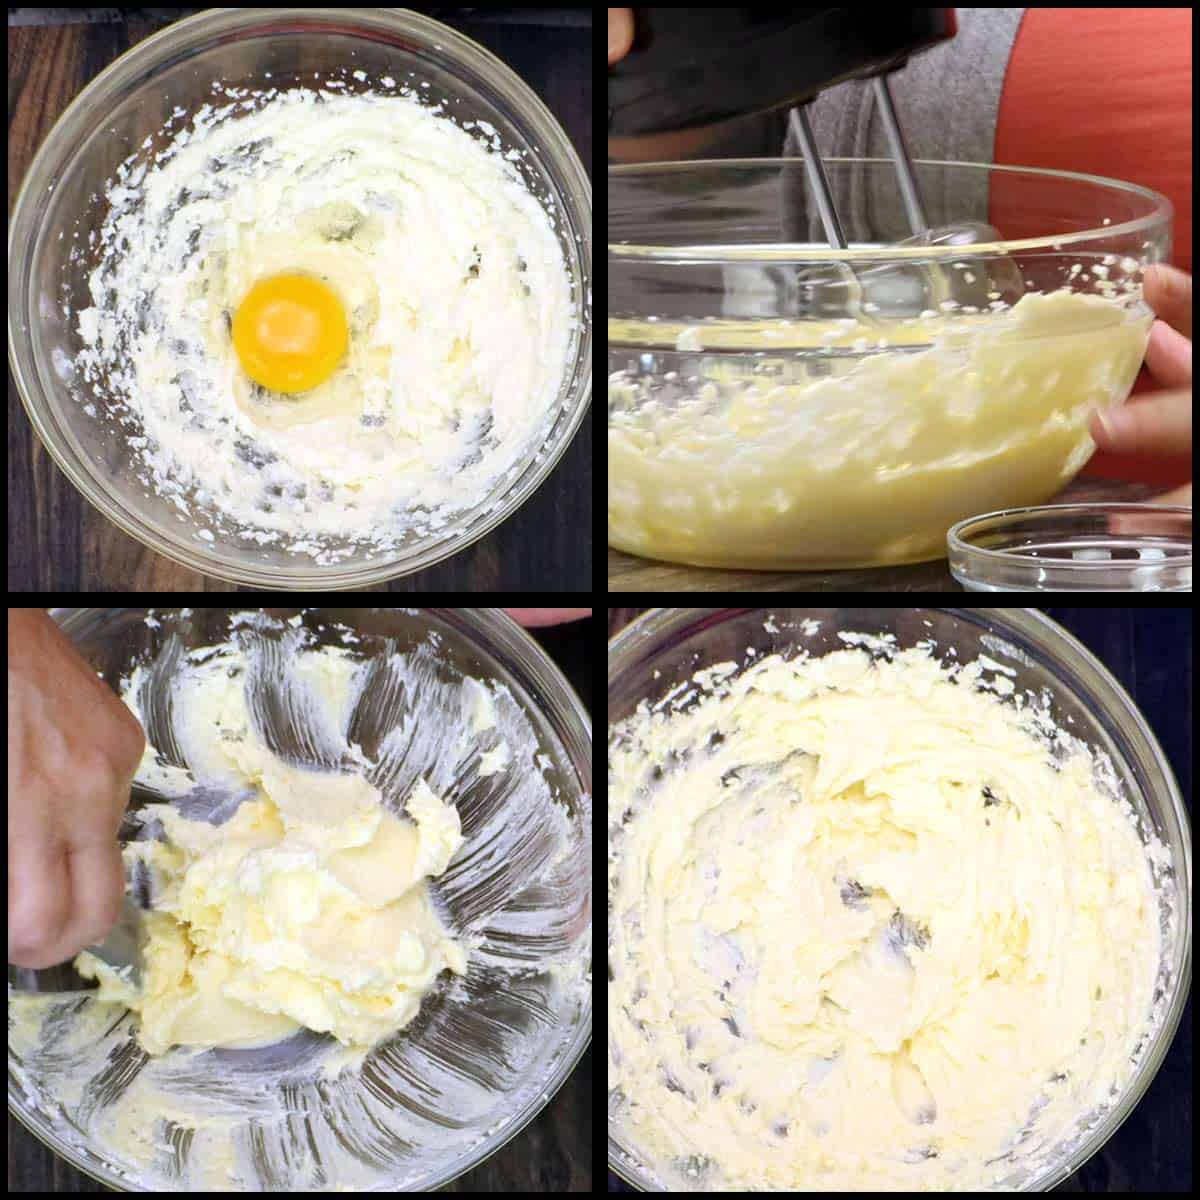 beating the egg into the butter mixture until it is light and fluffy.